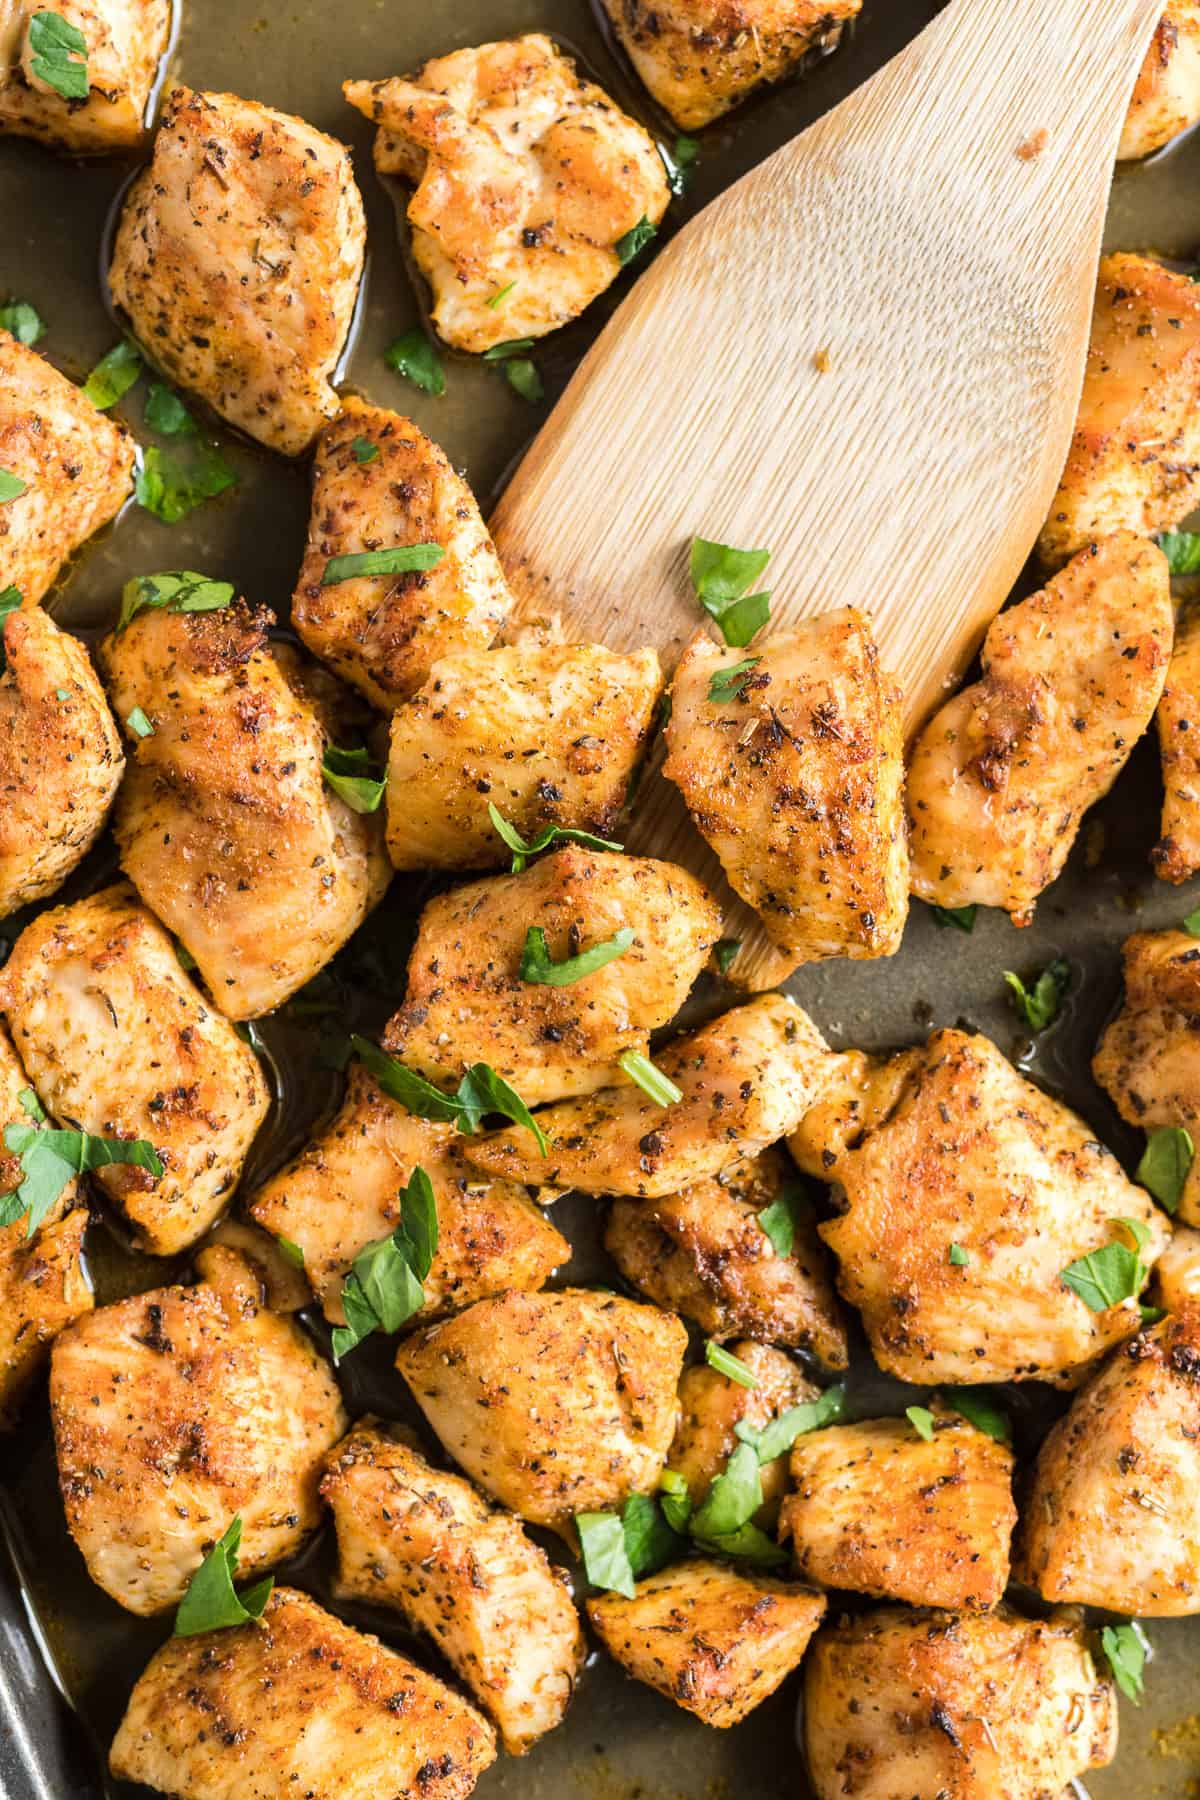 Small pieces of cooked chicken on a baking sheet topped with parsley.